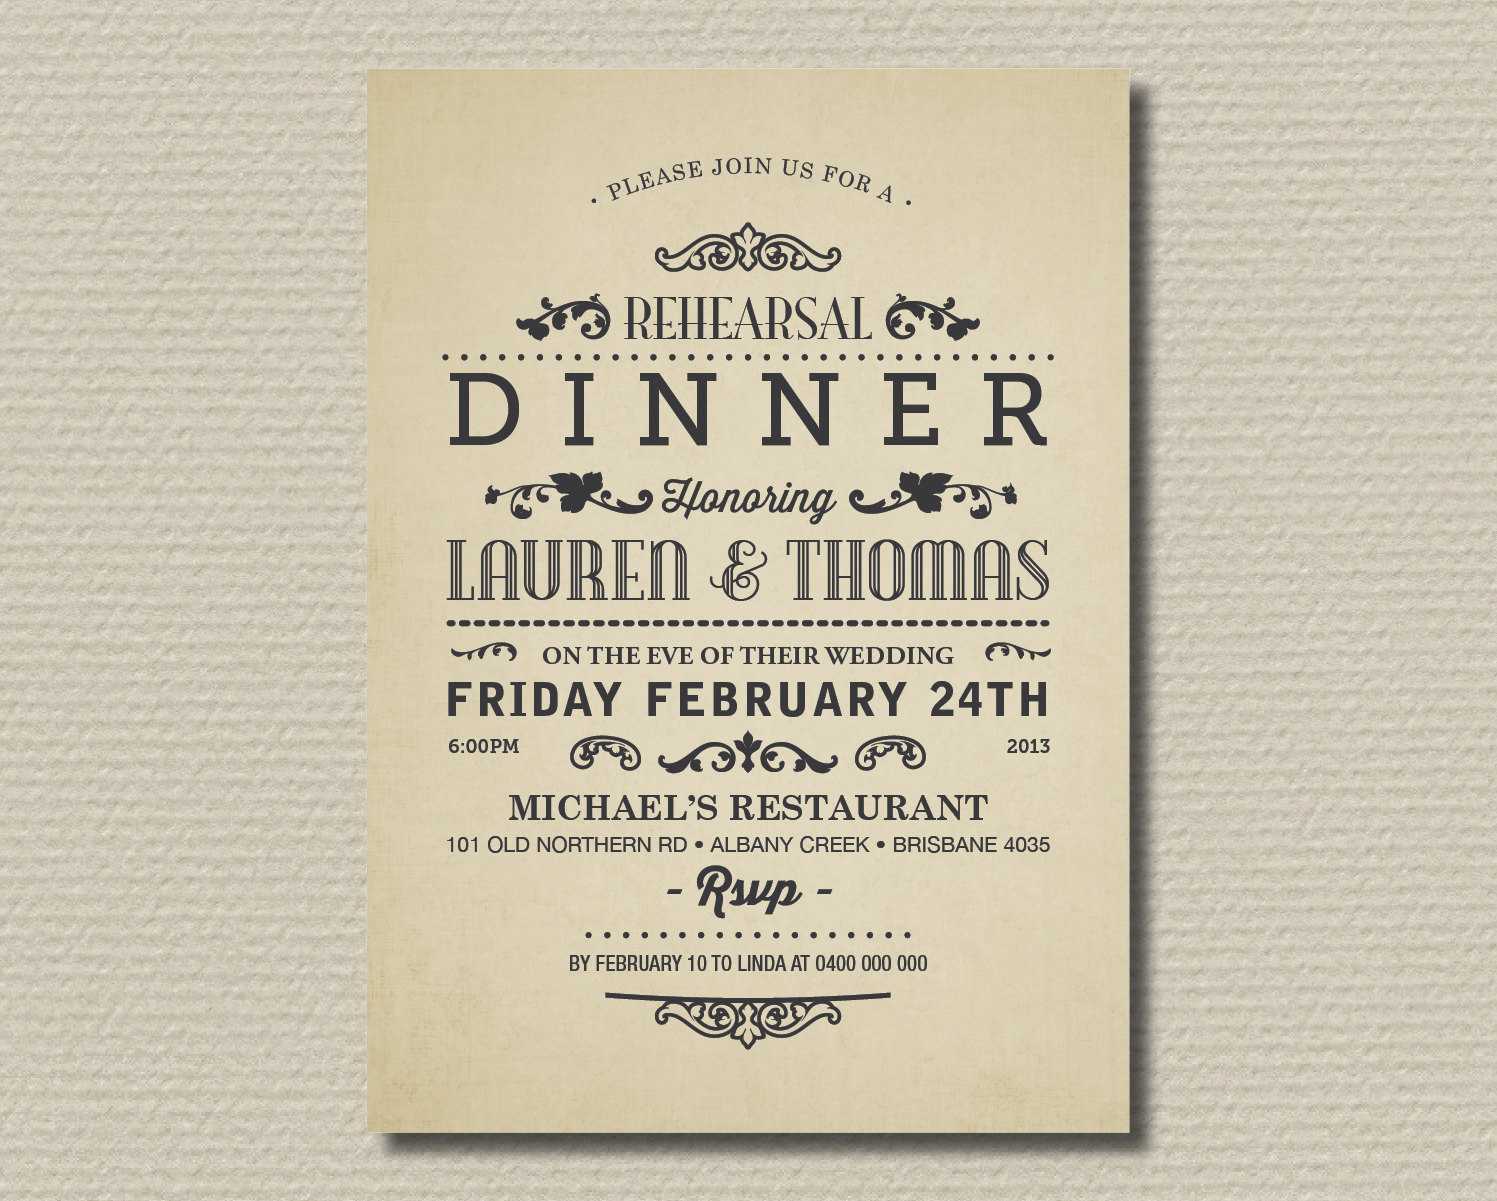 Invitation Wording For Dinner Party – Party Invitation With Free Dinner Invitation Templates For Word